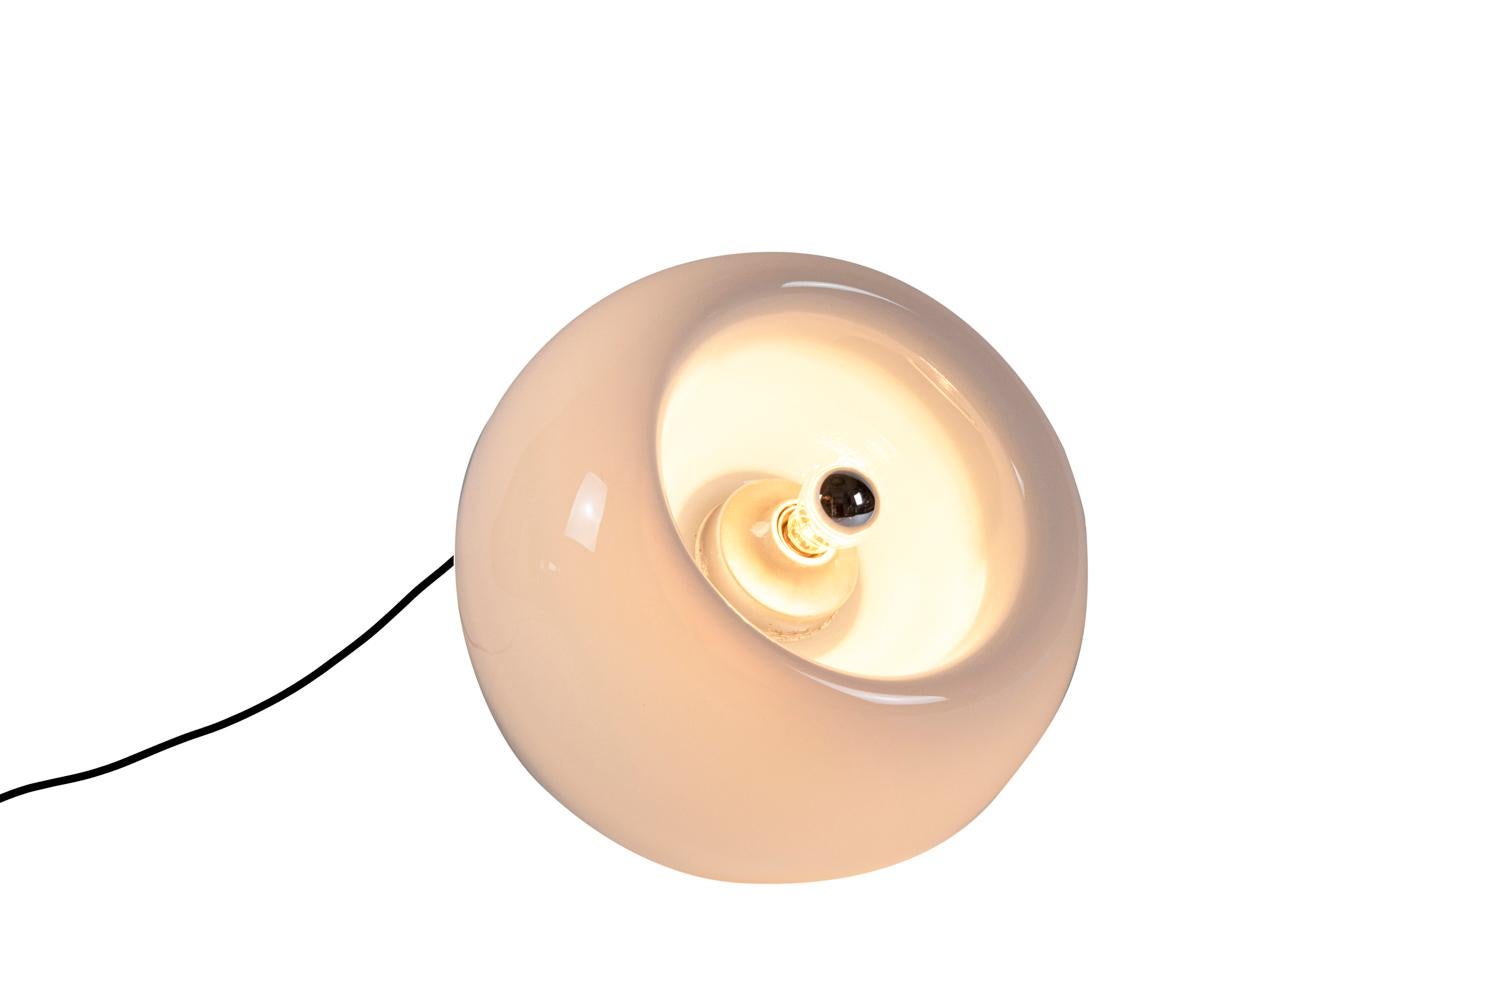 Eleonore Peduzzi-Riva for Artemide, attibuted to.
Spherical-shaped “Vacuna” lamp in white tainted Murano glass with concave recess. It can be placed in two different positions.

Work realized in 1968.

Functional electrical system.

Another